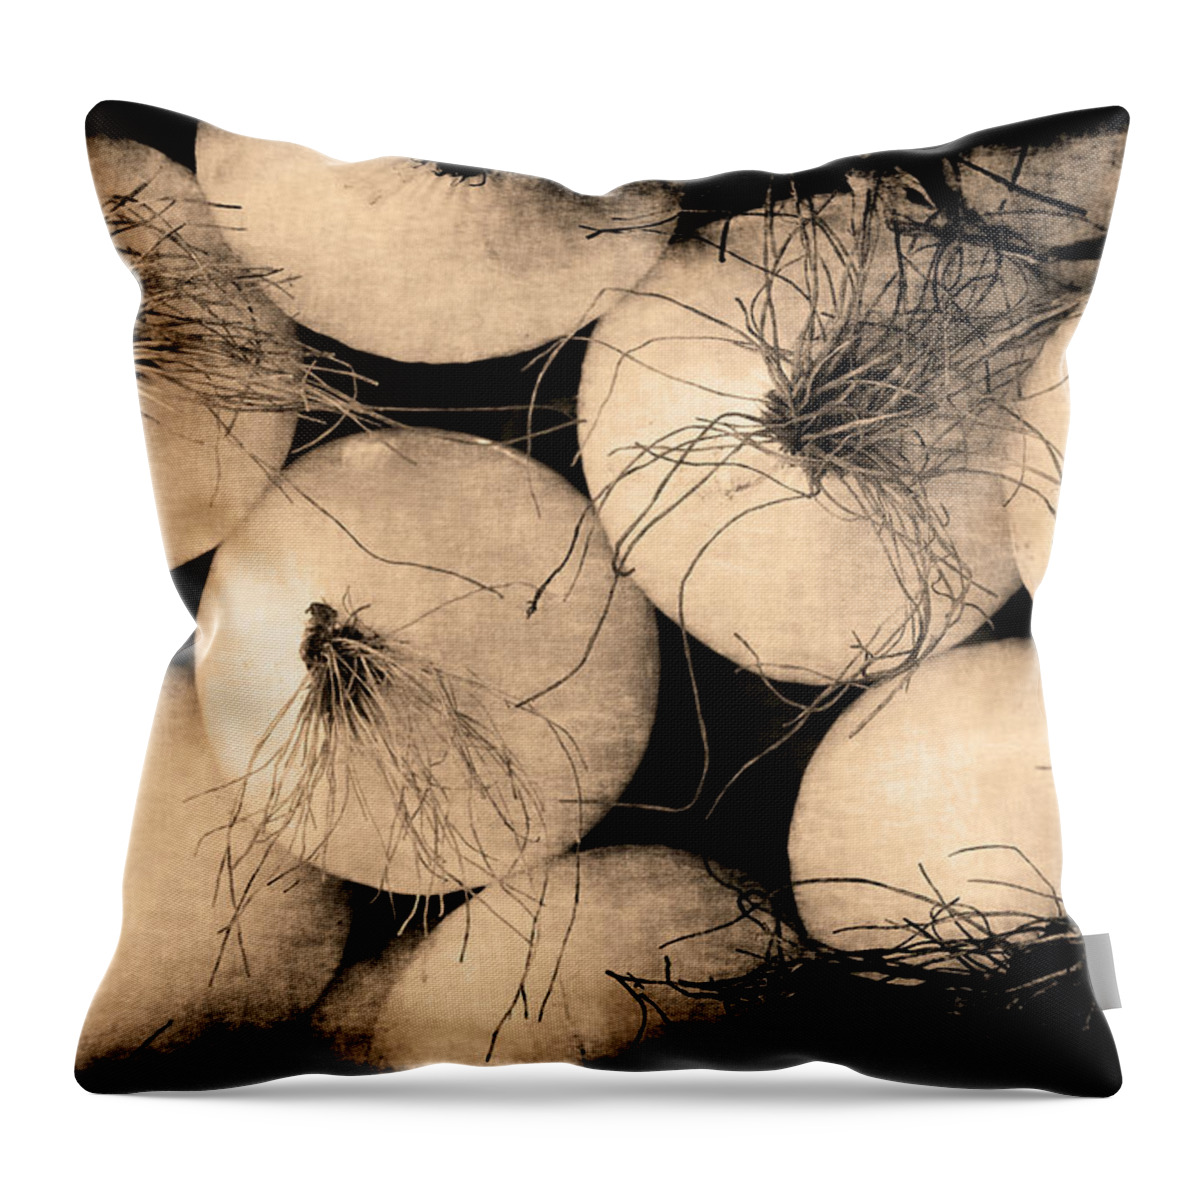 Onions Throw Pillow featuring the photograph Onions by Jennifer Wright